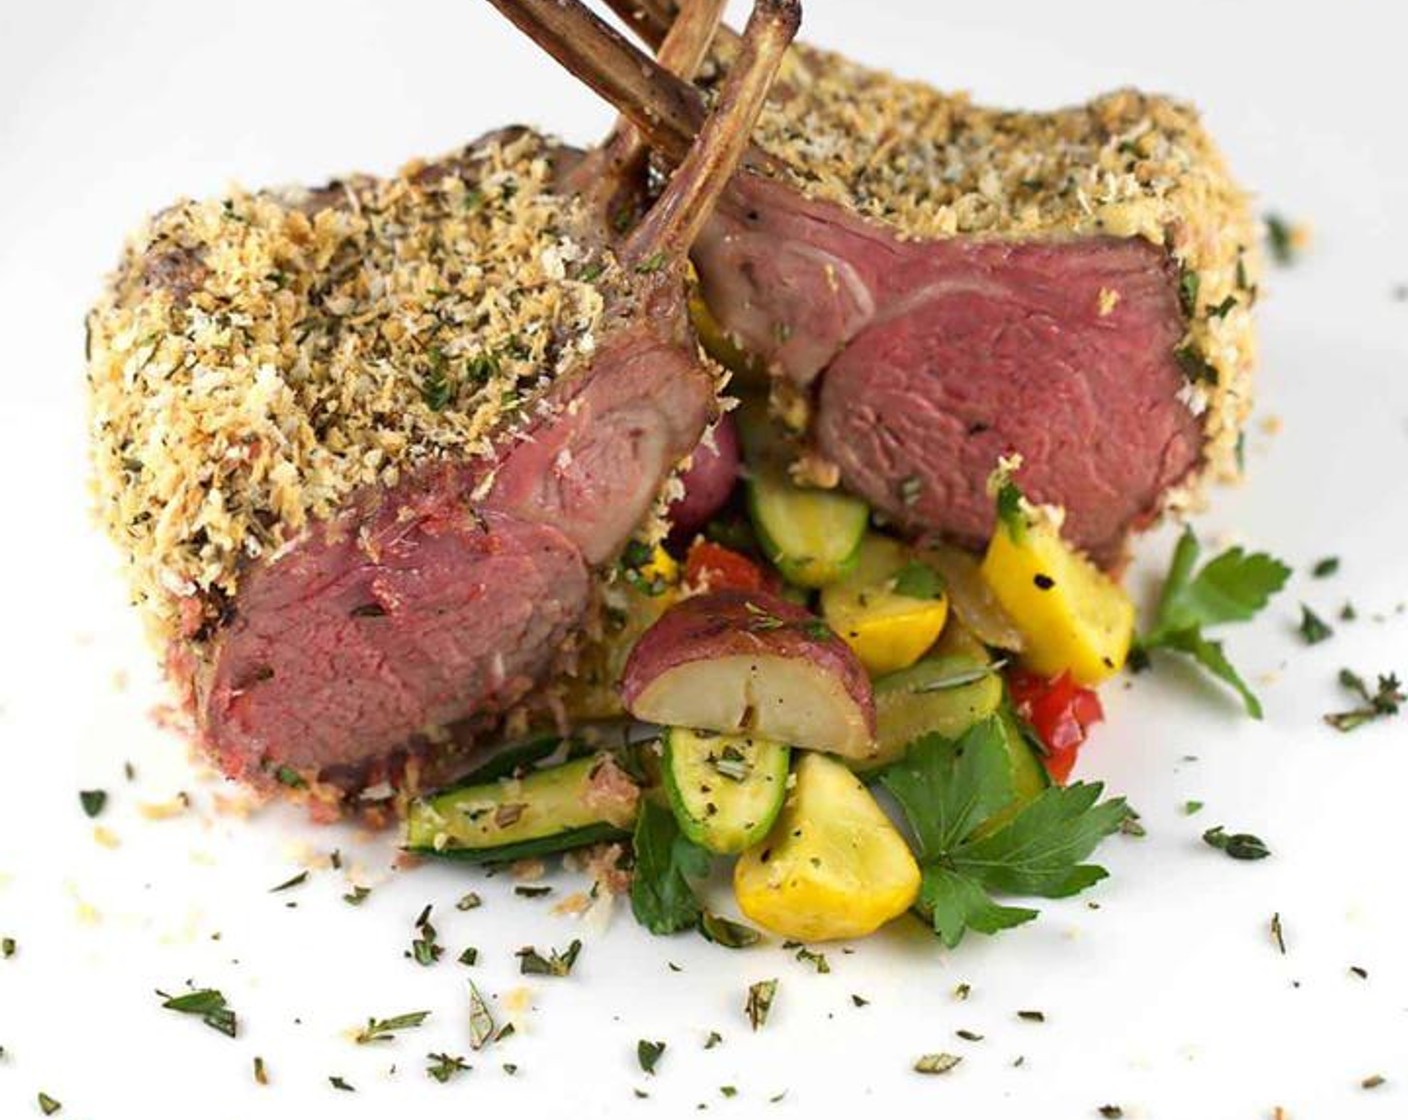 Panko Herb Crusted Rack of Lamb with Vegetables